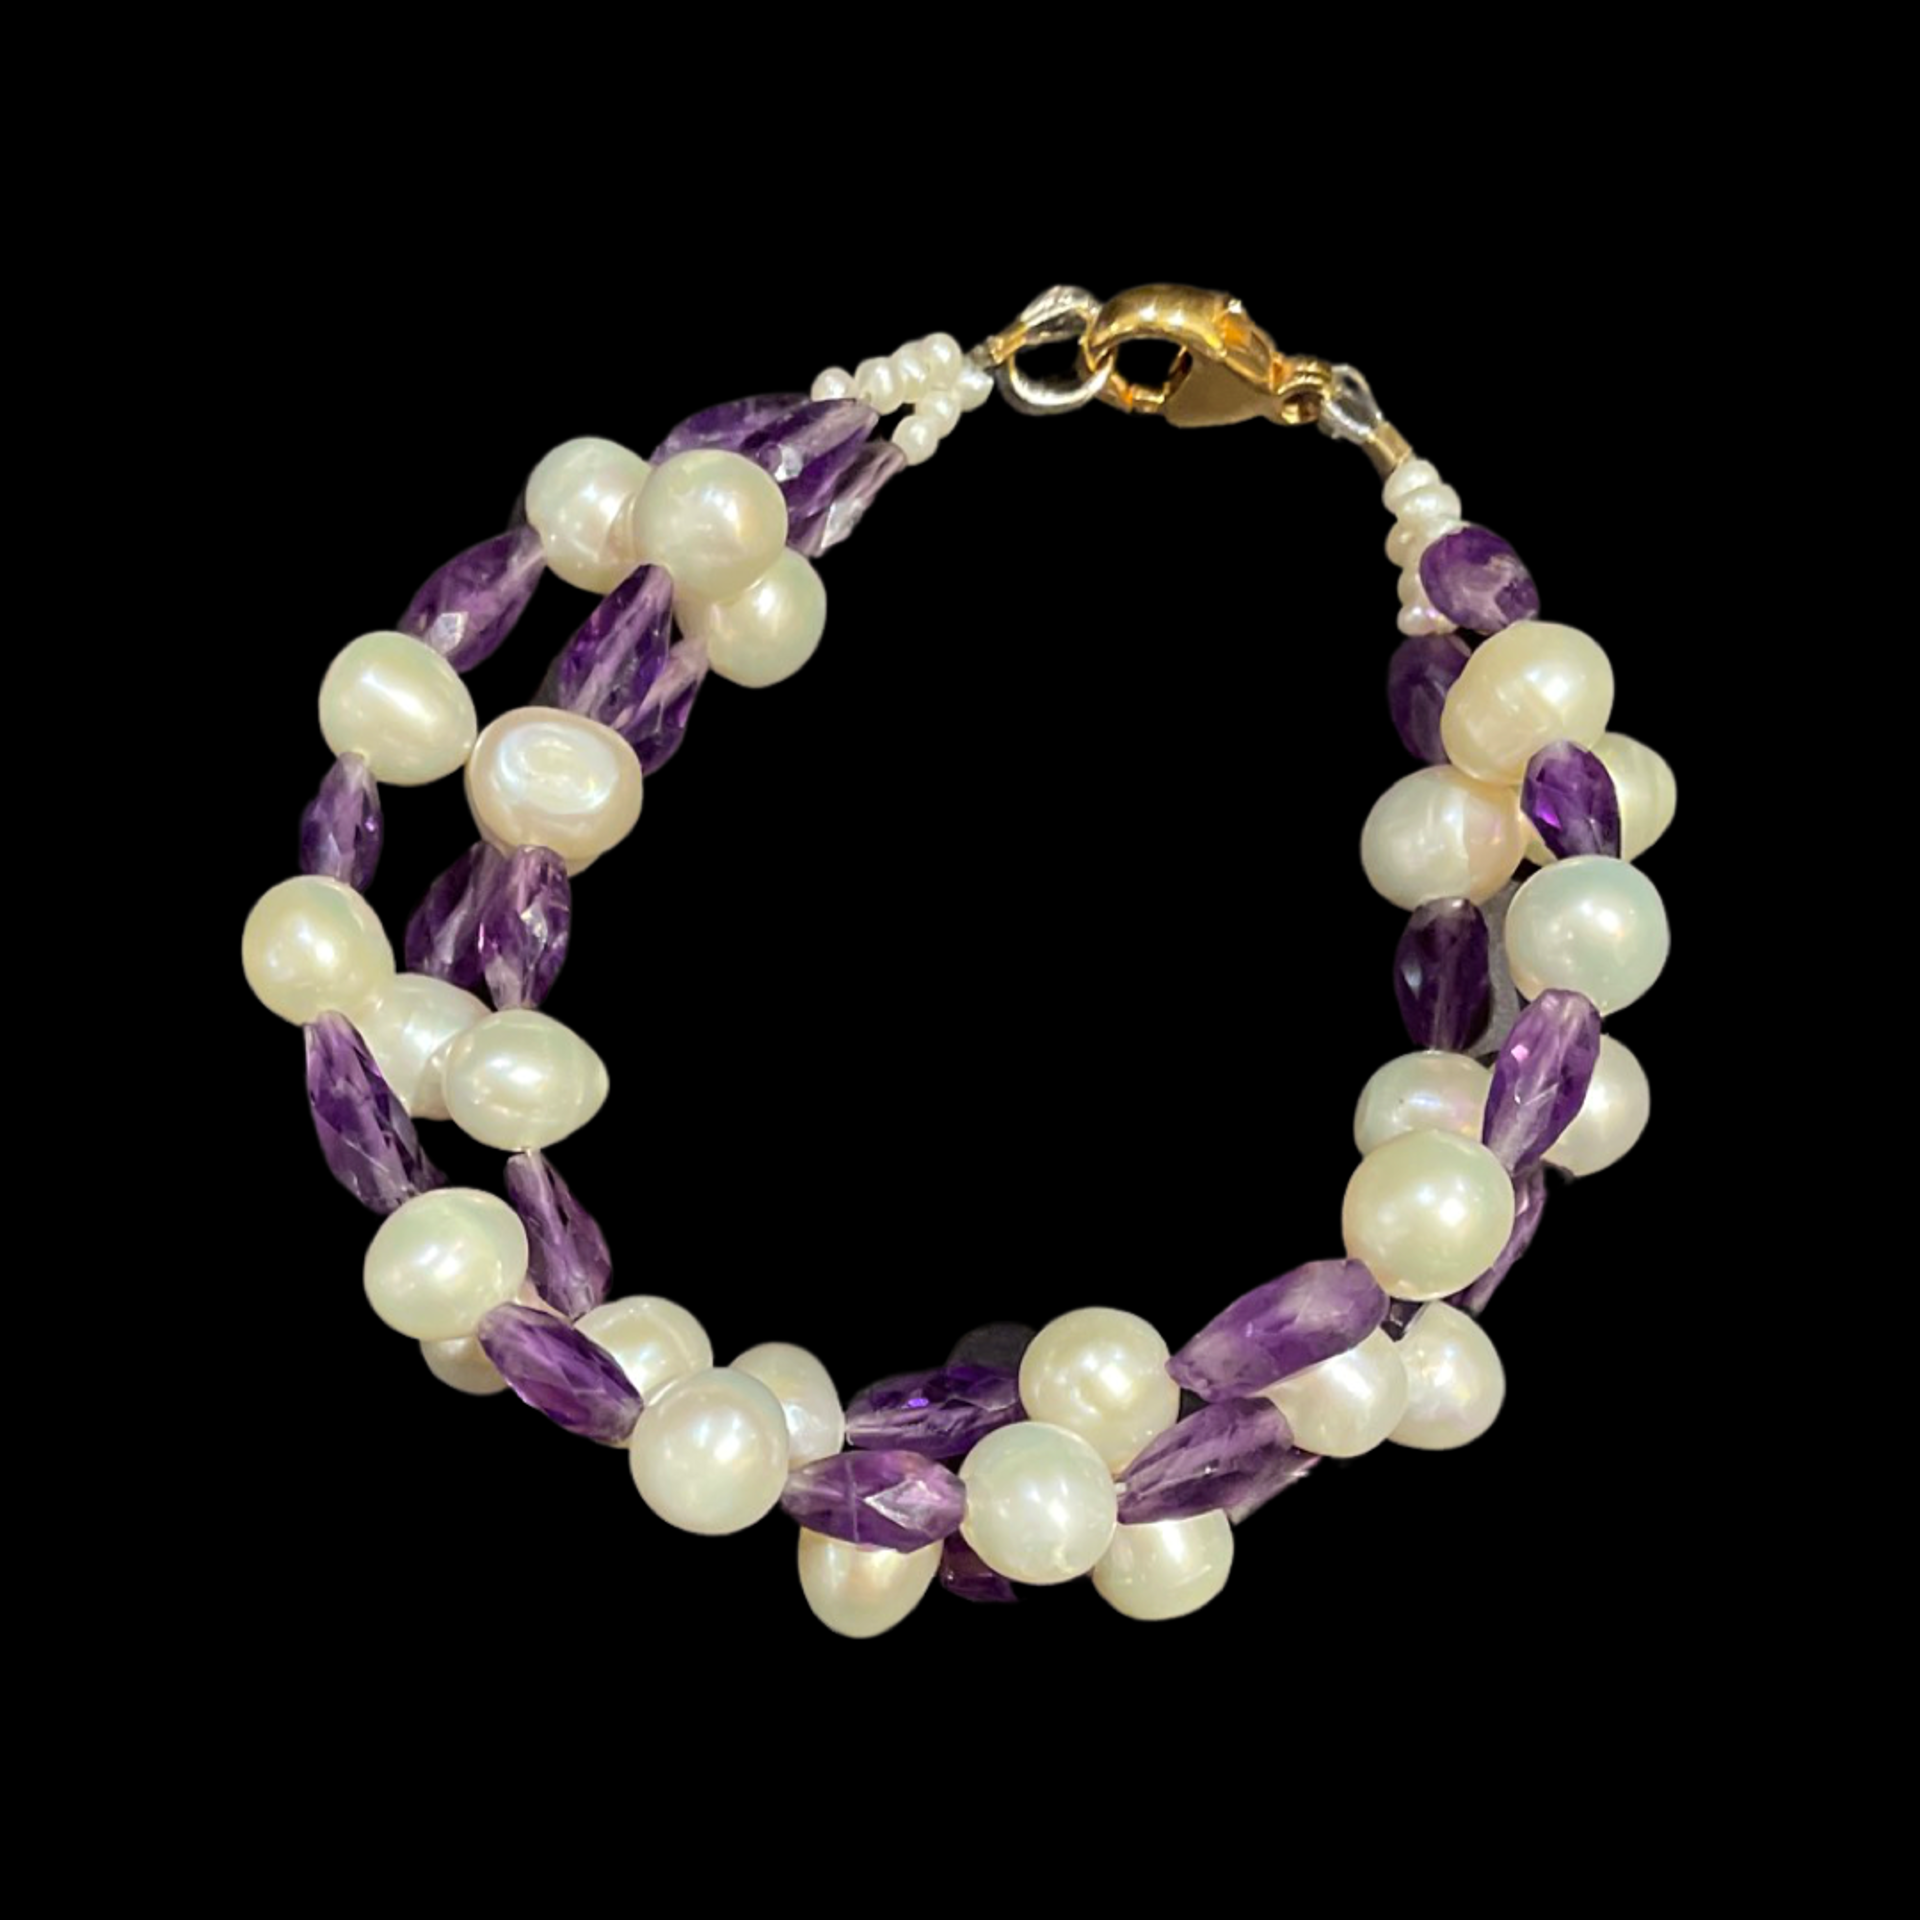 Amethyst & Cultured Pearl Bracelet by Patrice Box